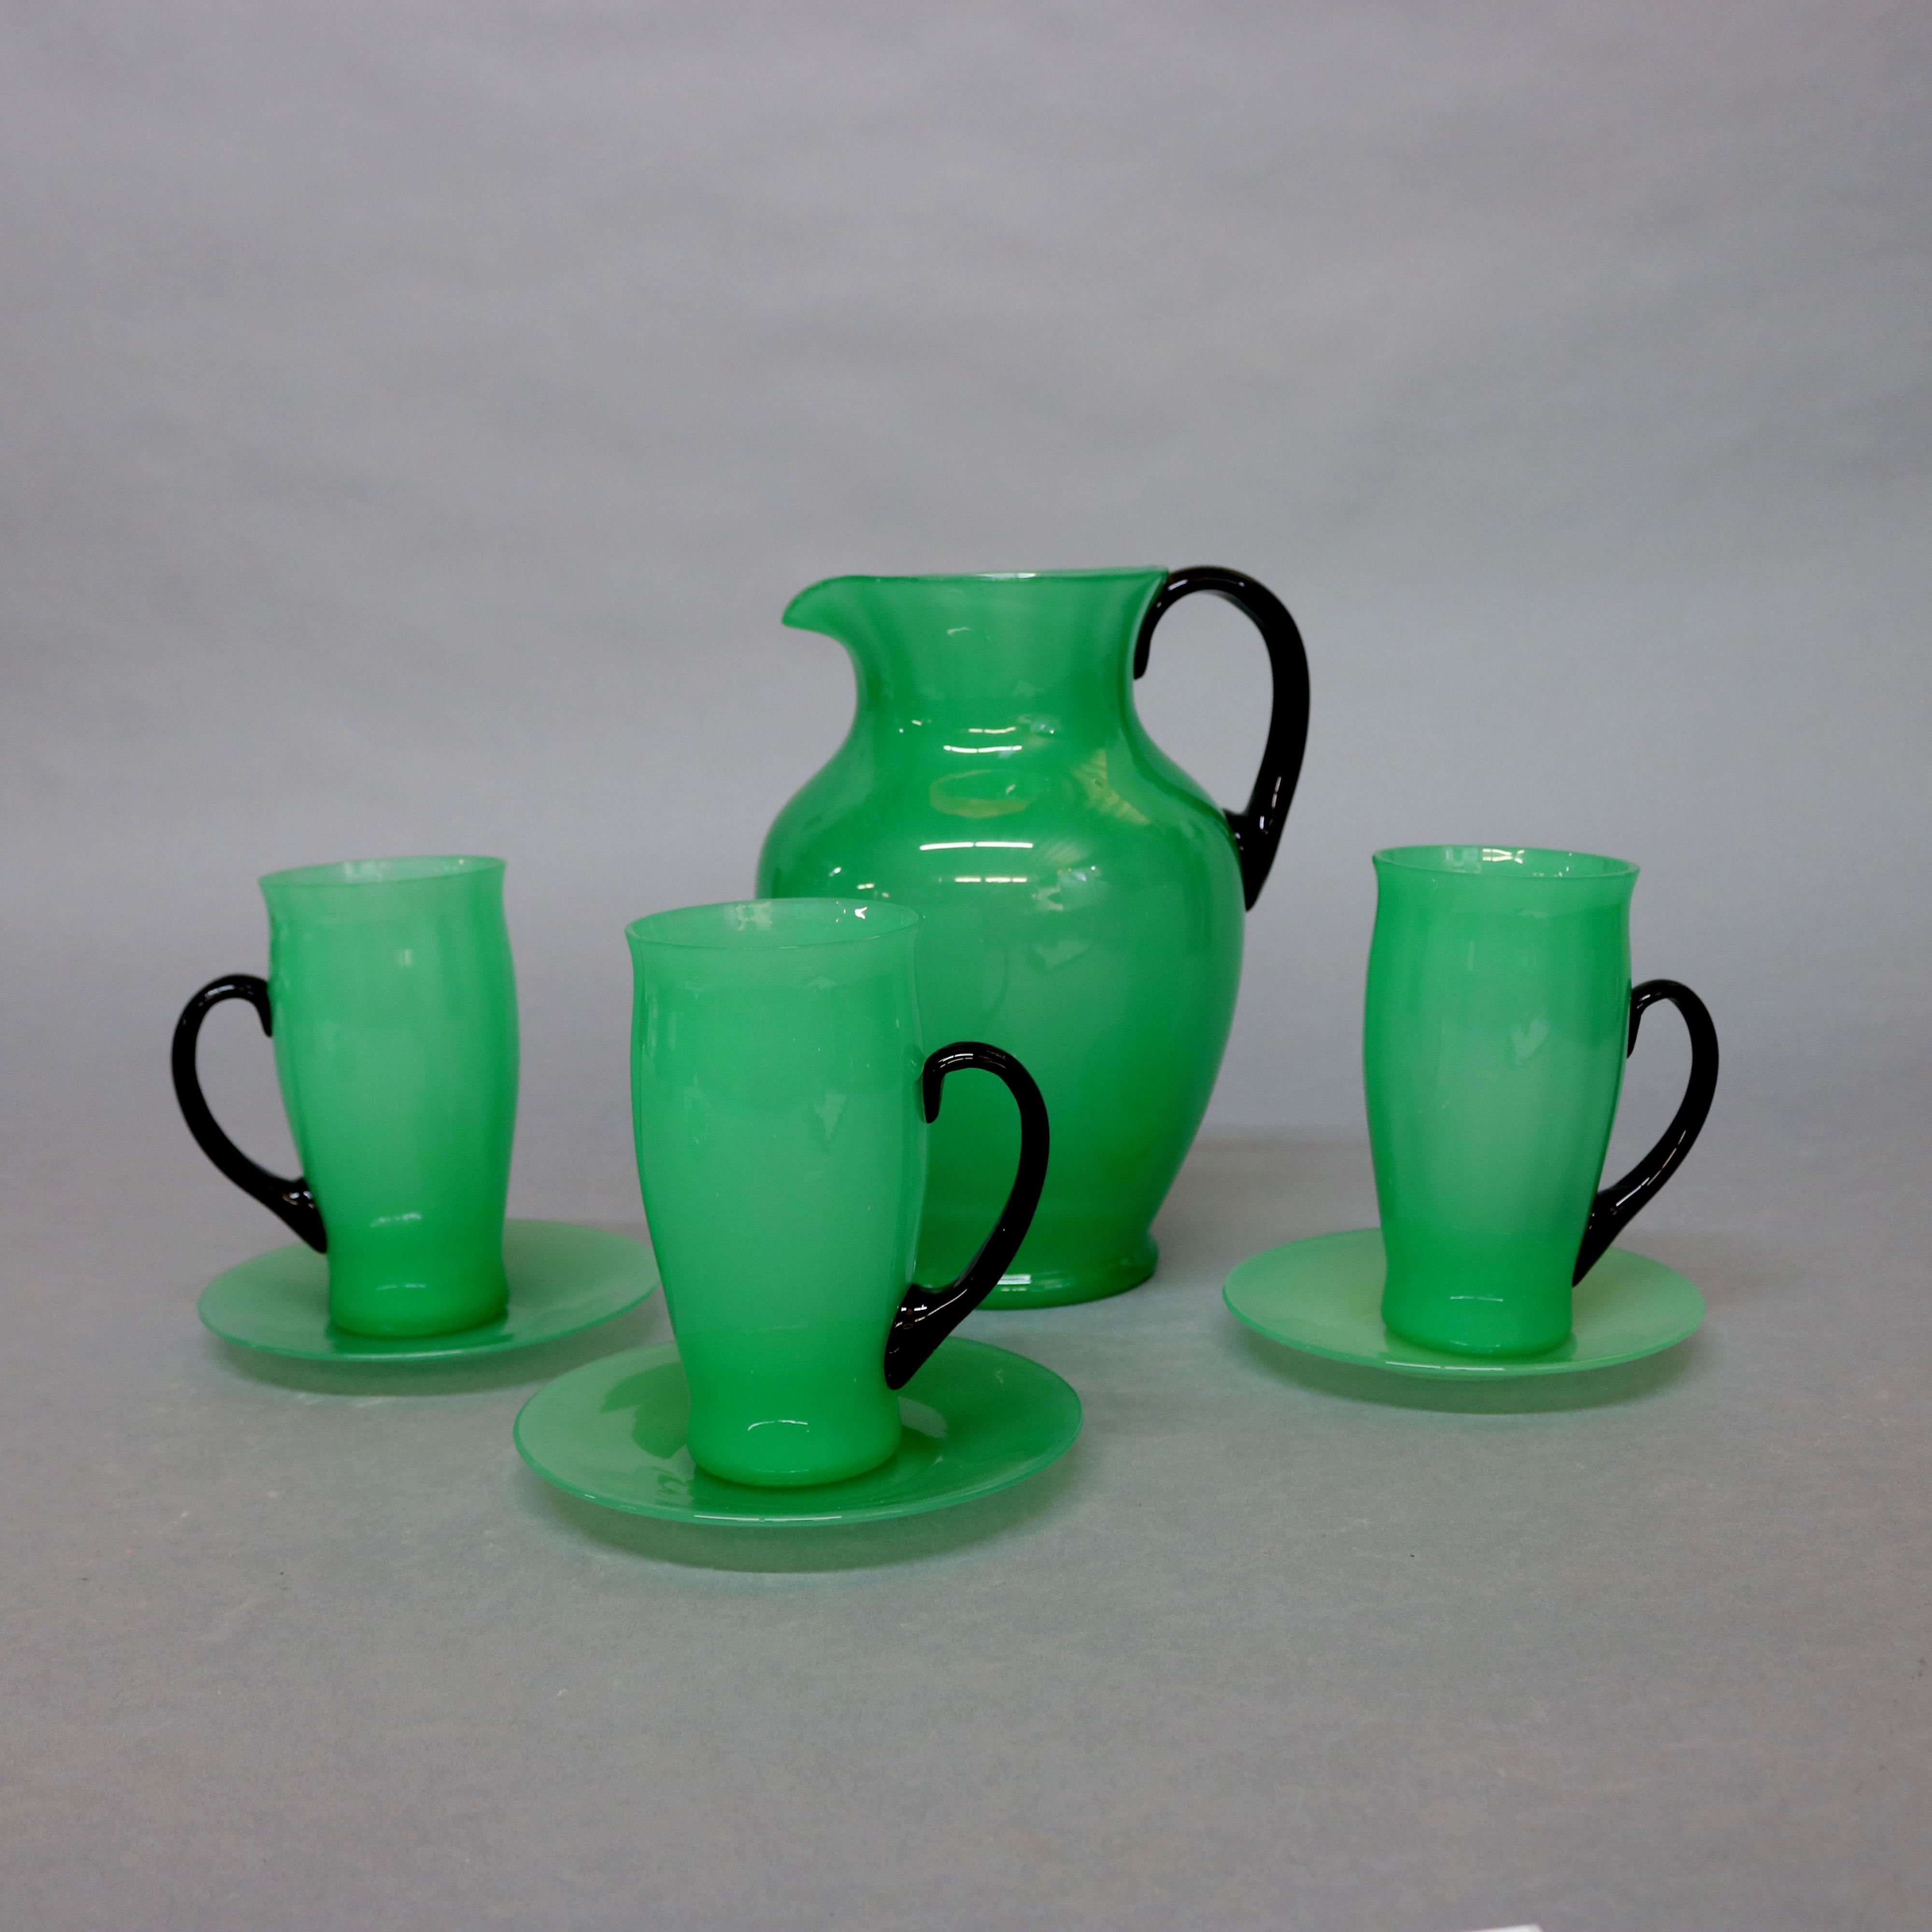 Antique handcrafted Steuben chocolate set features jade green art glass with black handles and includes a pitcher with three handled cups and saucers, circa 1930.

Measures: pitcher 9.5